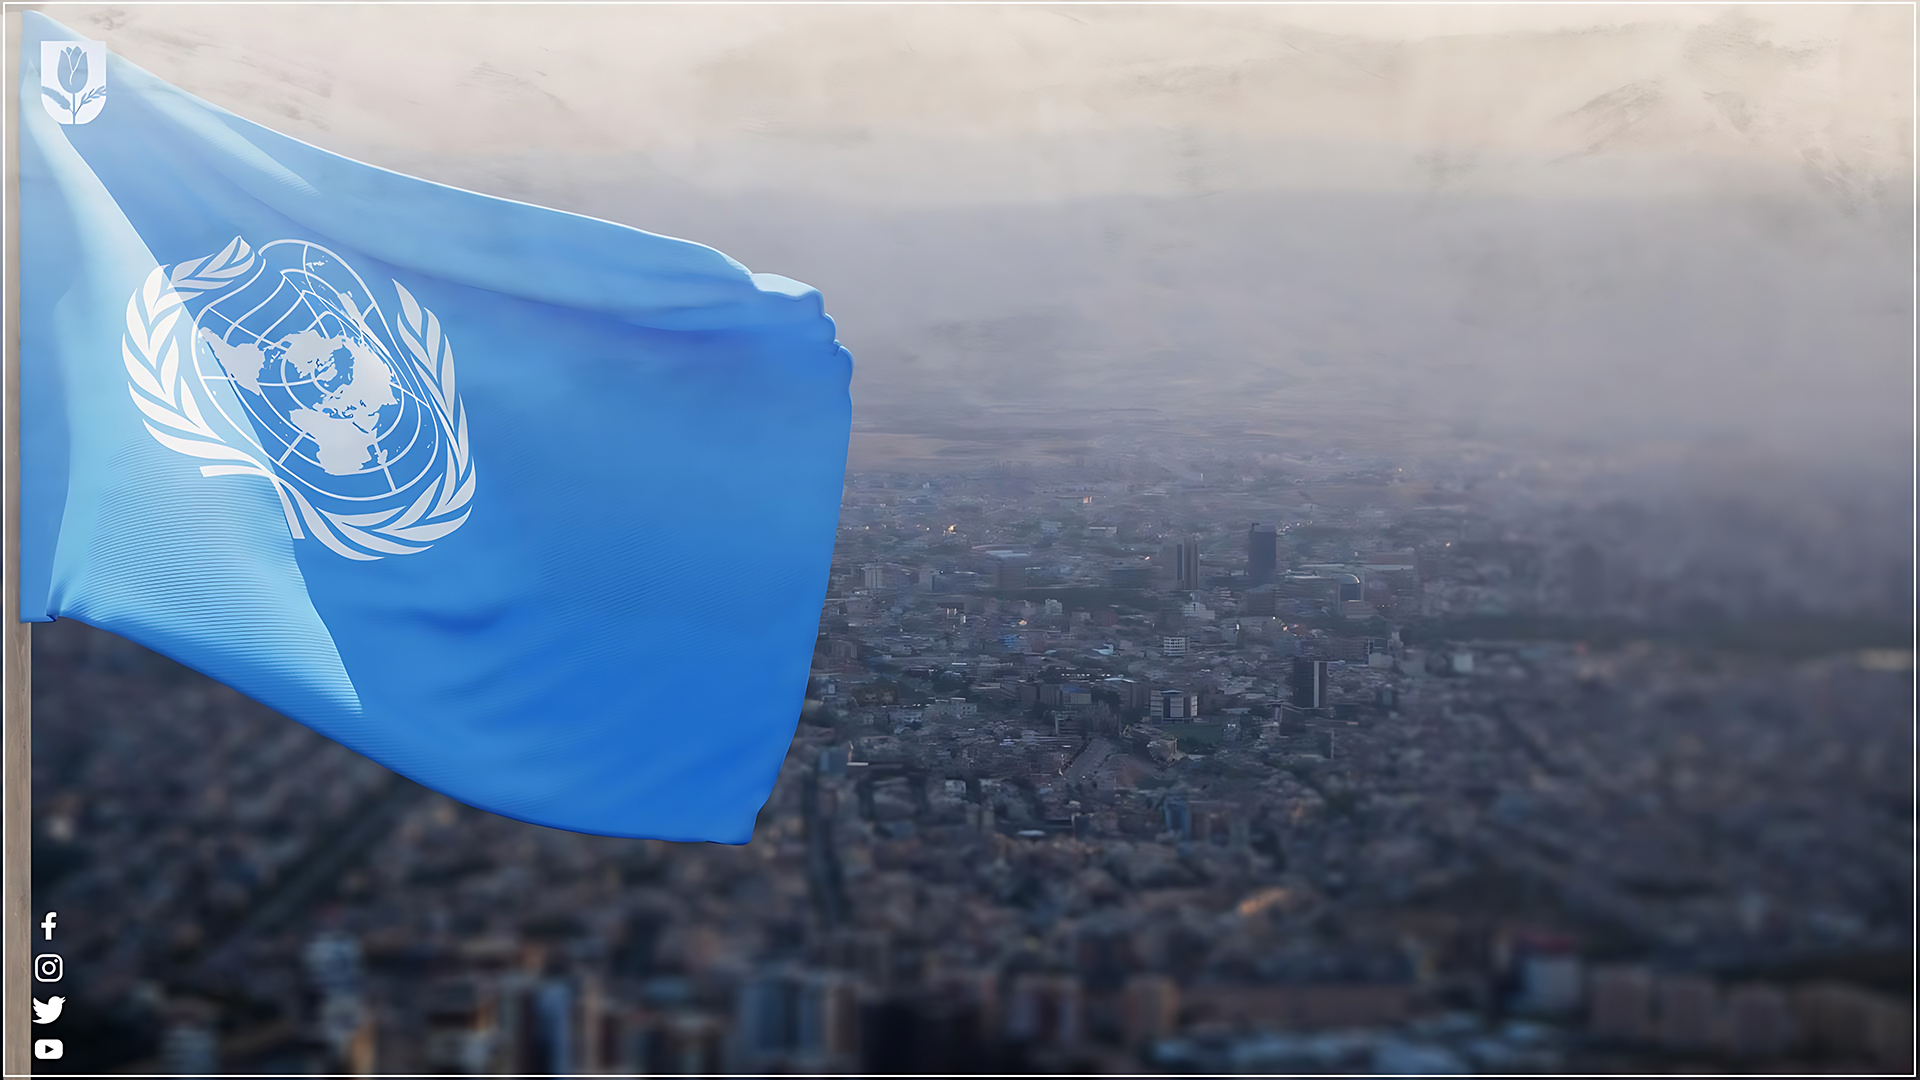  UN flag and the background is Sulaymaniyah city